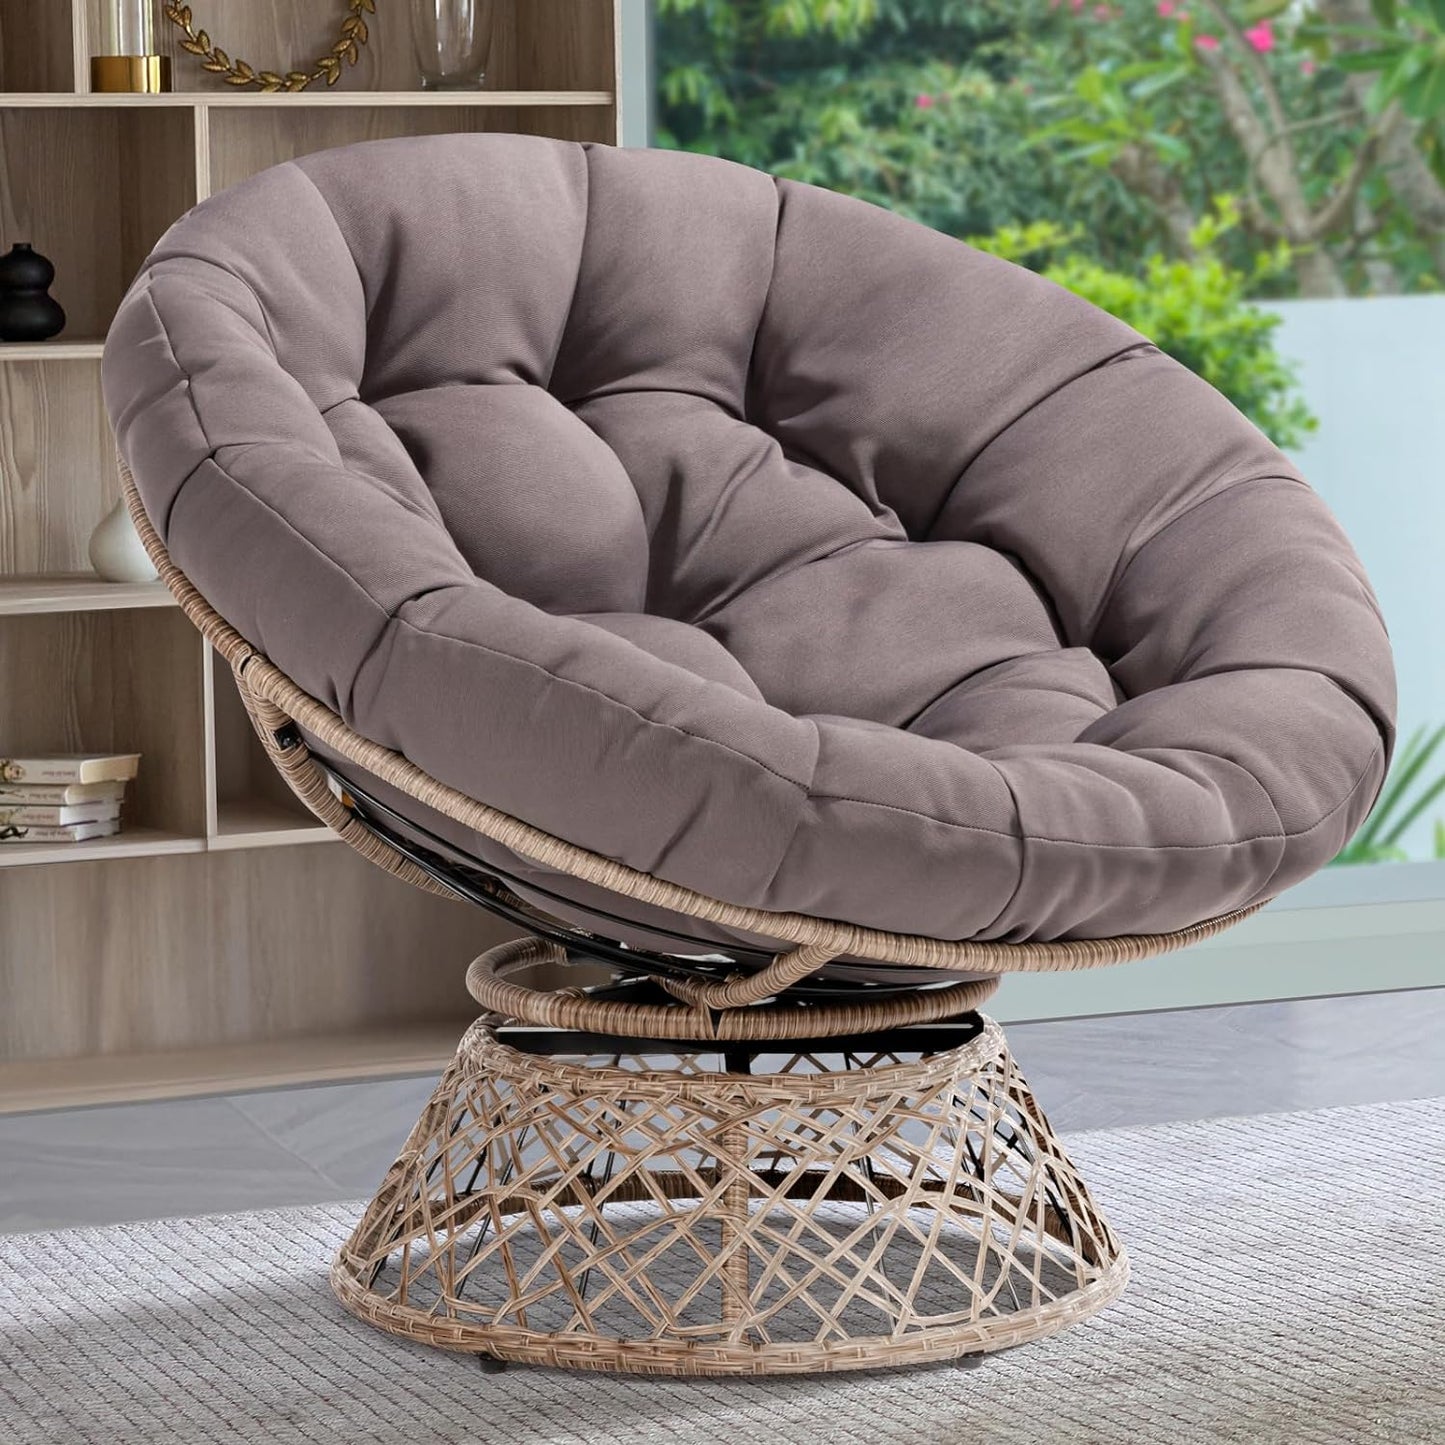 Ergonomic Wicker Papasan Chair with Soft Thick Density Fabric Cushion, High Capacity Steel Frame, 360 Degree Swivel for Living, Bedroom, Reading Room, Lounge, Smoky Quartz - Brown Base